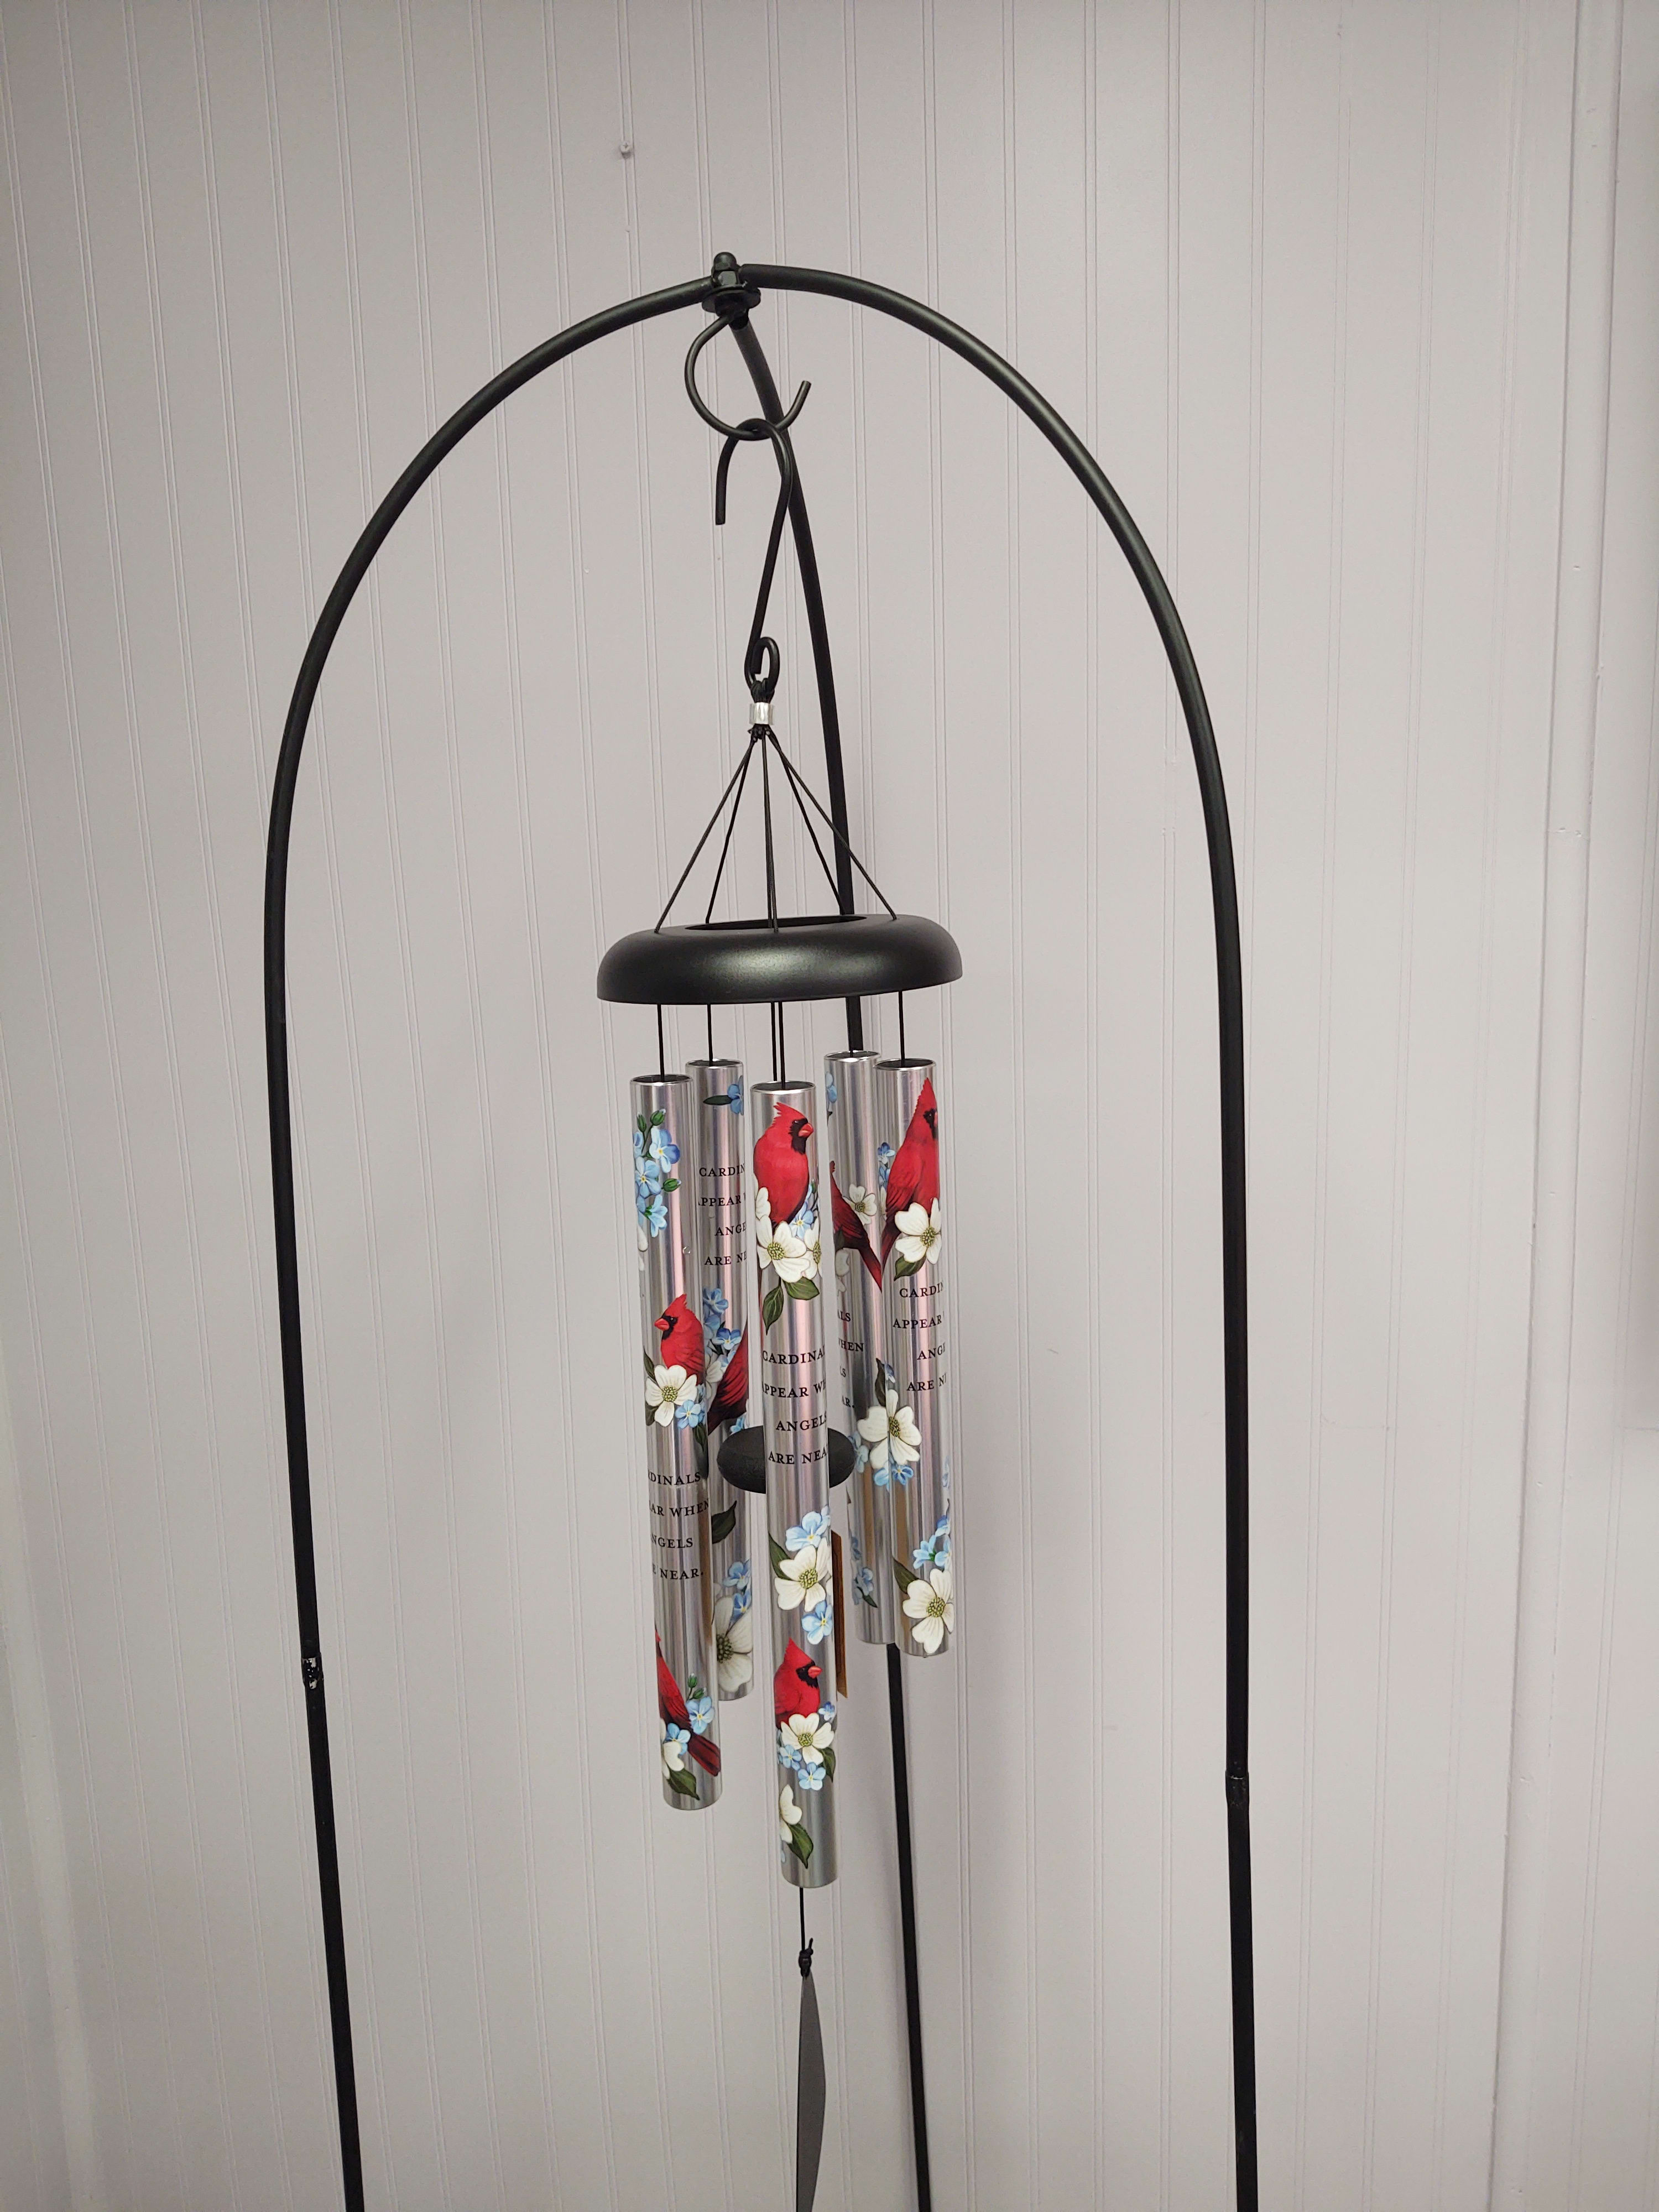 Wind chime by Carson, mostly cardinals in Midland, MI